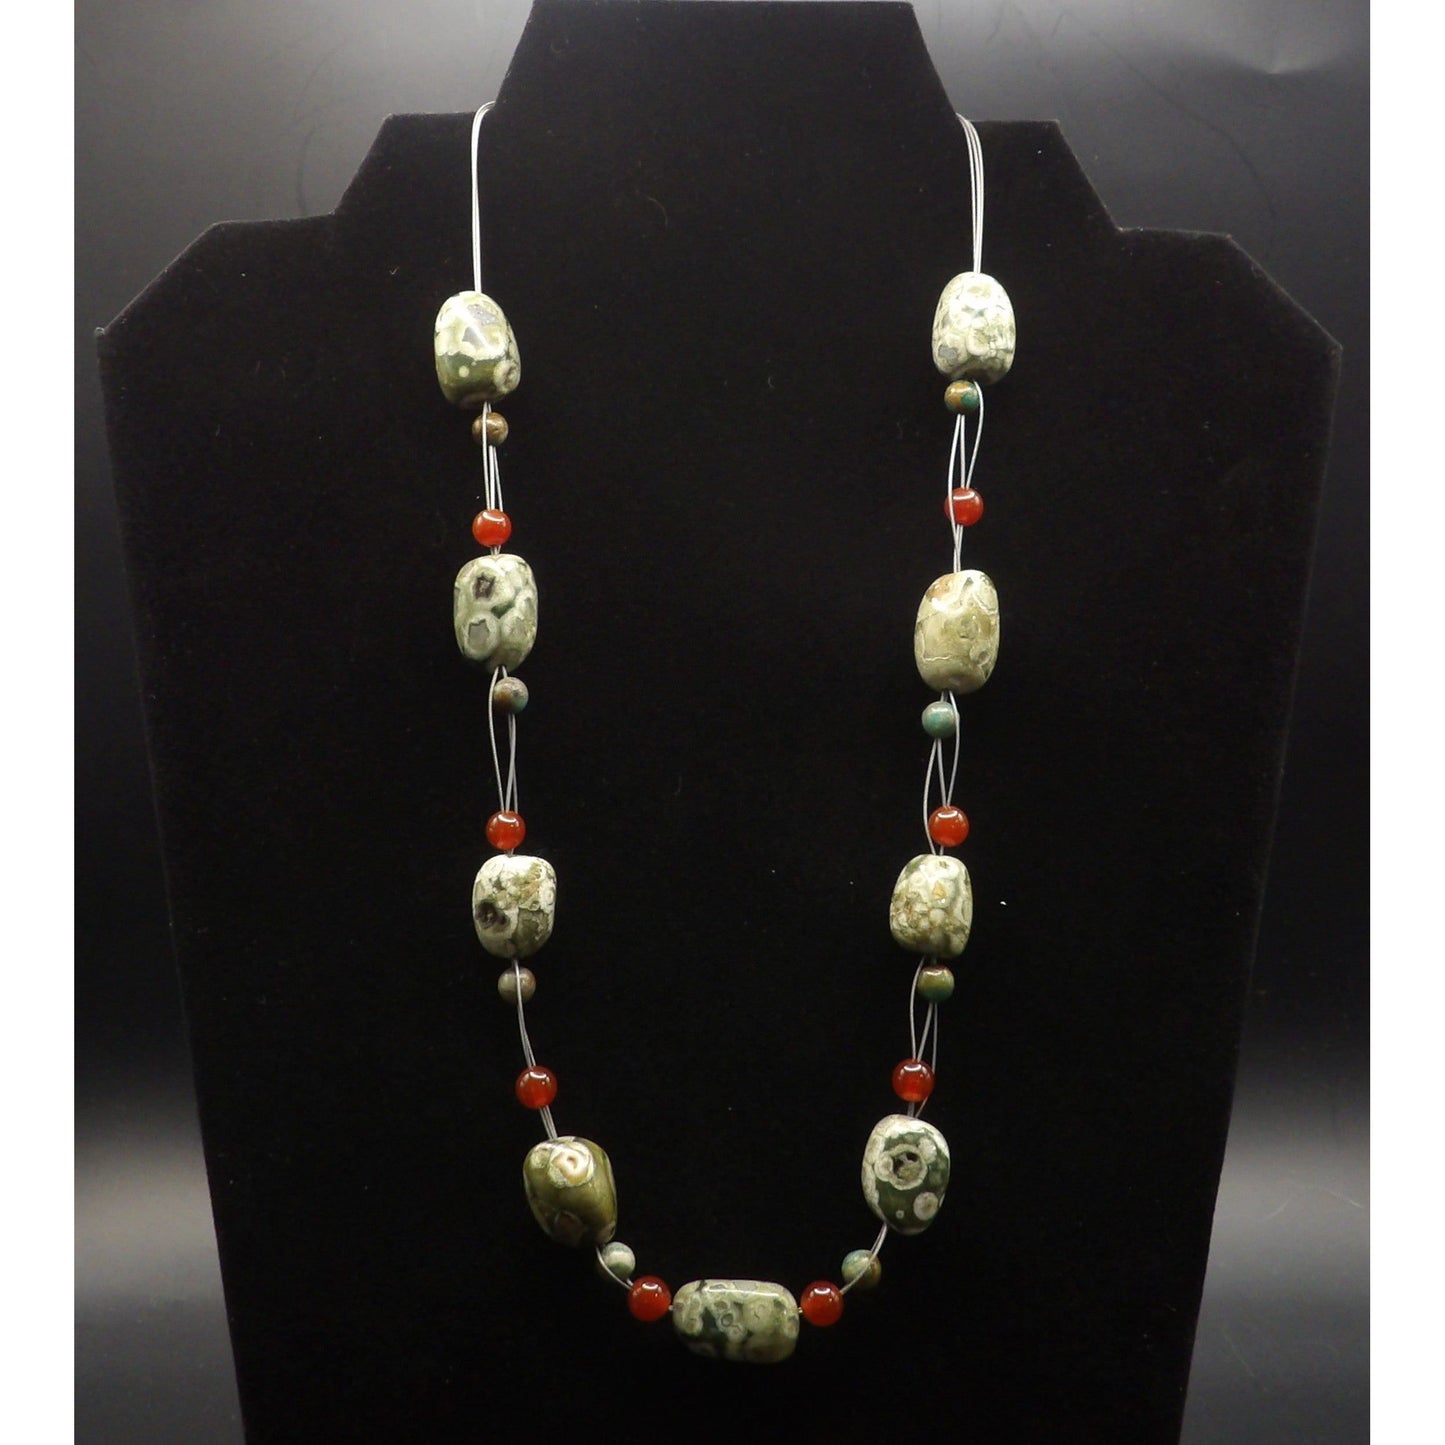 Rhyolite Stones with Carnelian and Turquoise Stones - Floating Necklace